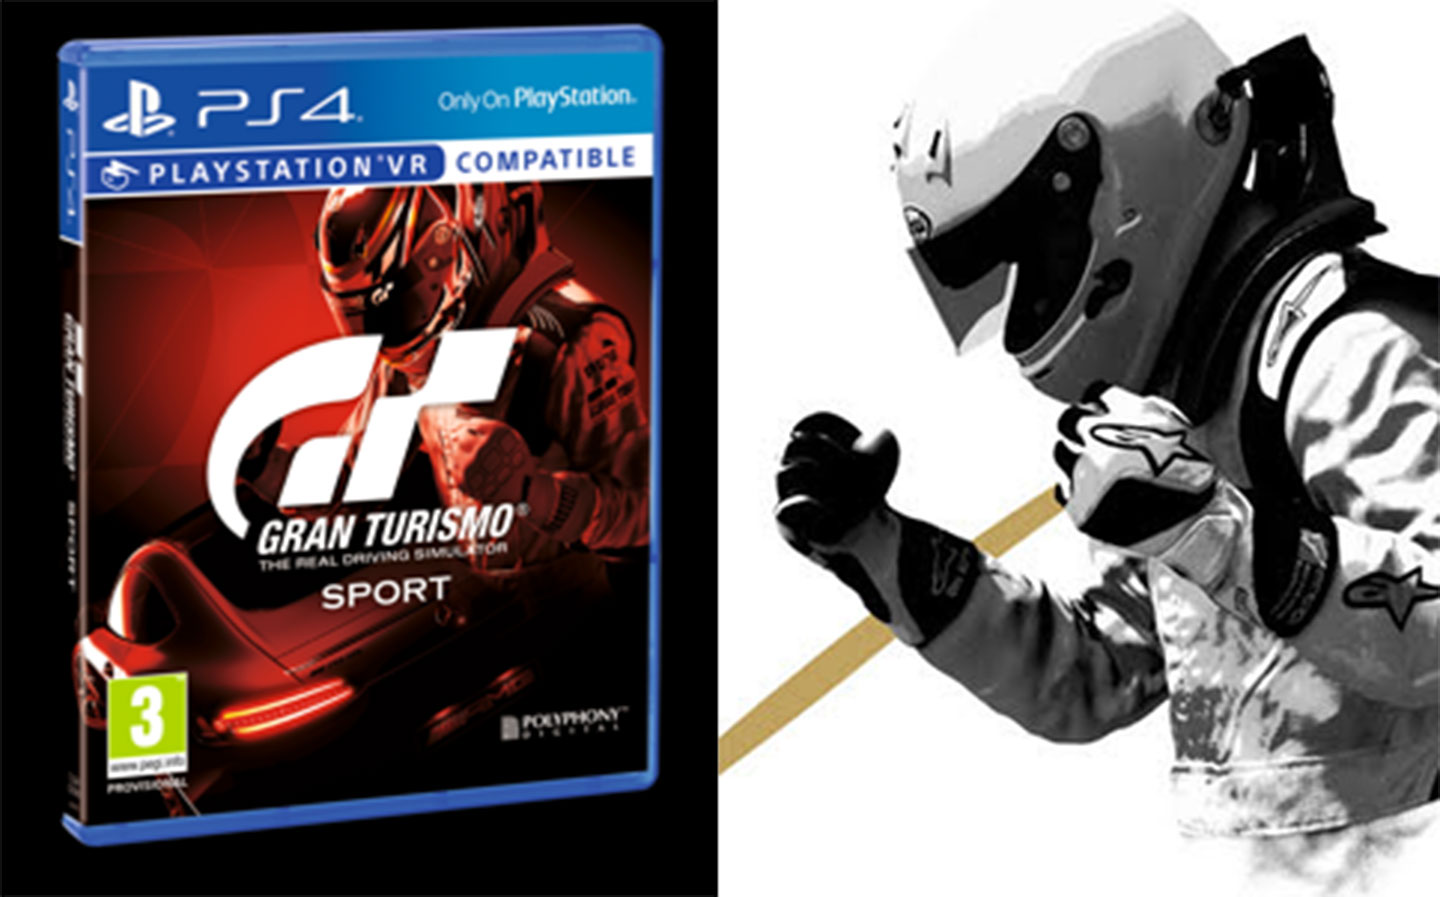 win gran turismo sport, Thrustmaster T-GT wheel and pedals and Brands Hatch BMW M4 driving experience in the amazing competition